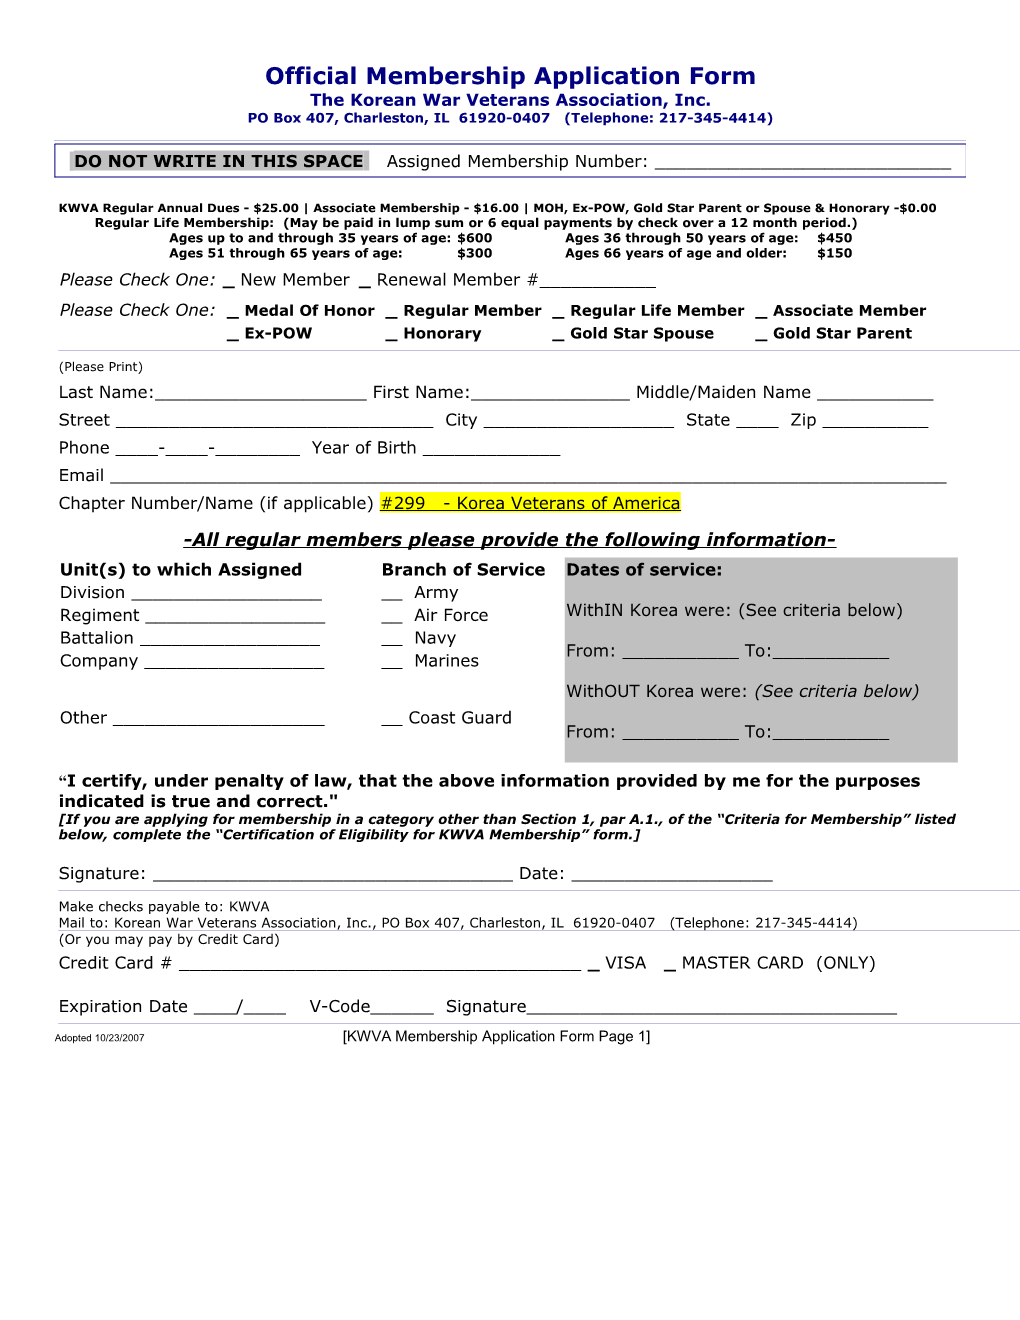 Official Membership Application Form